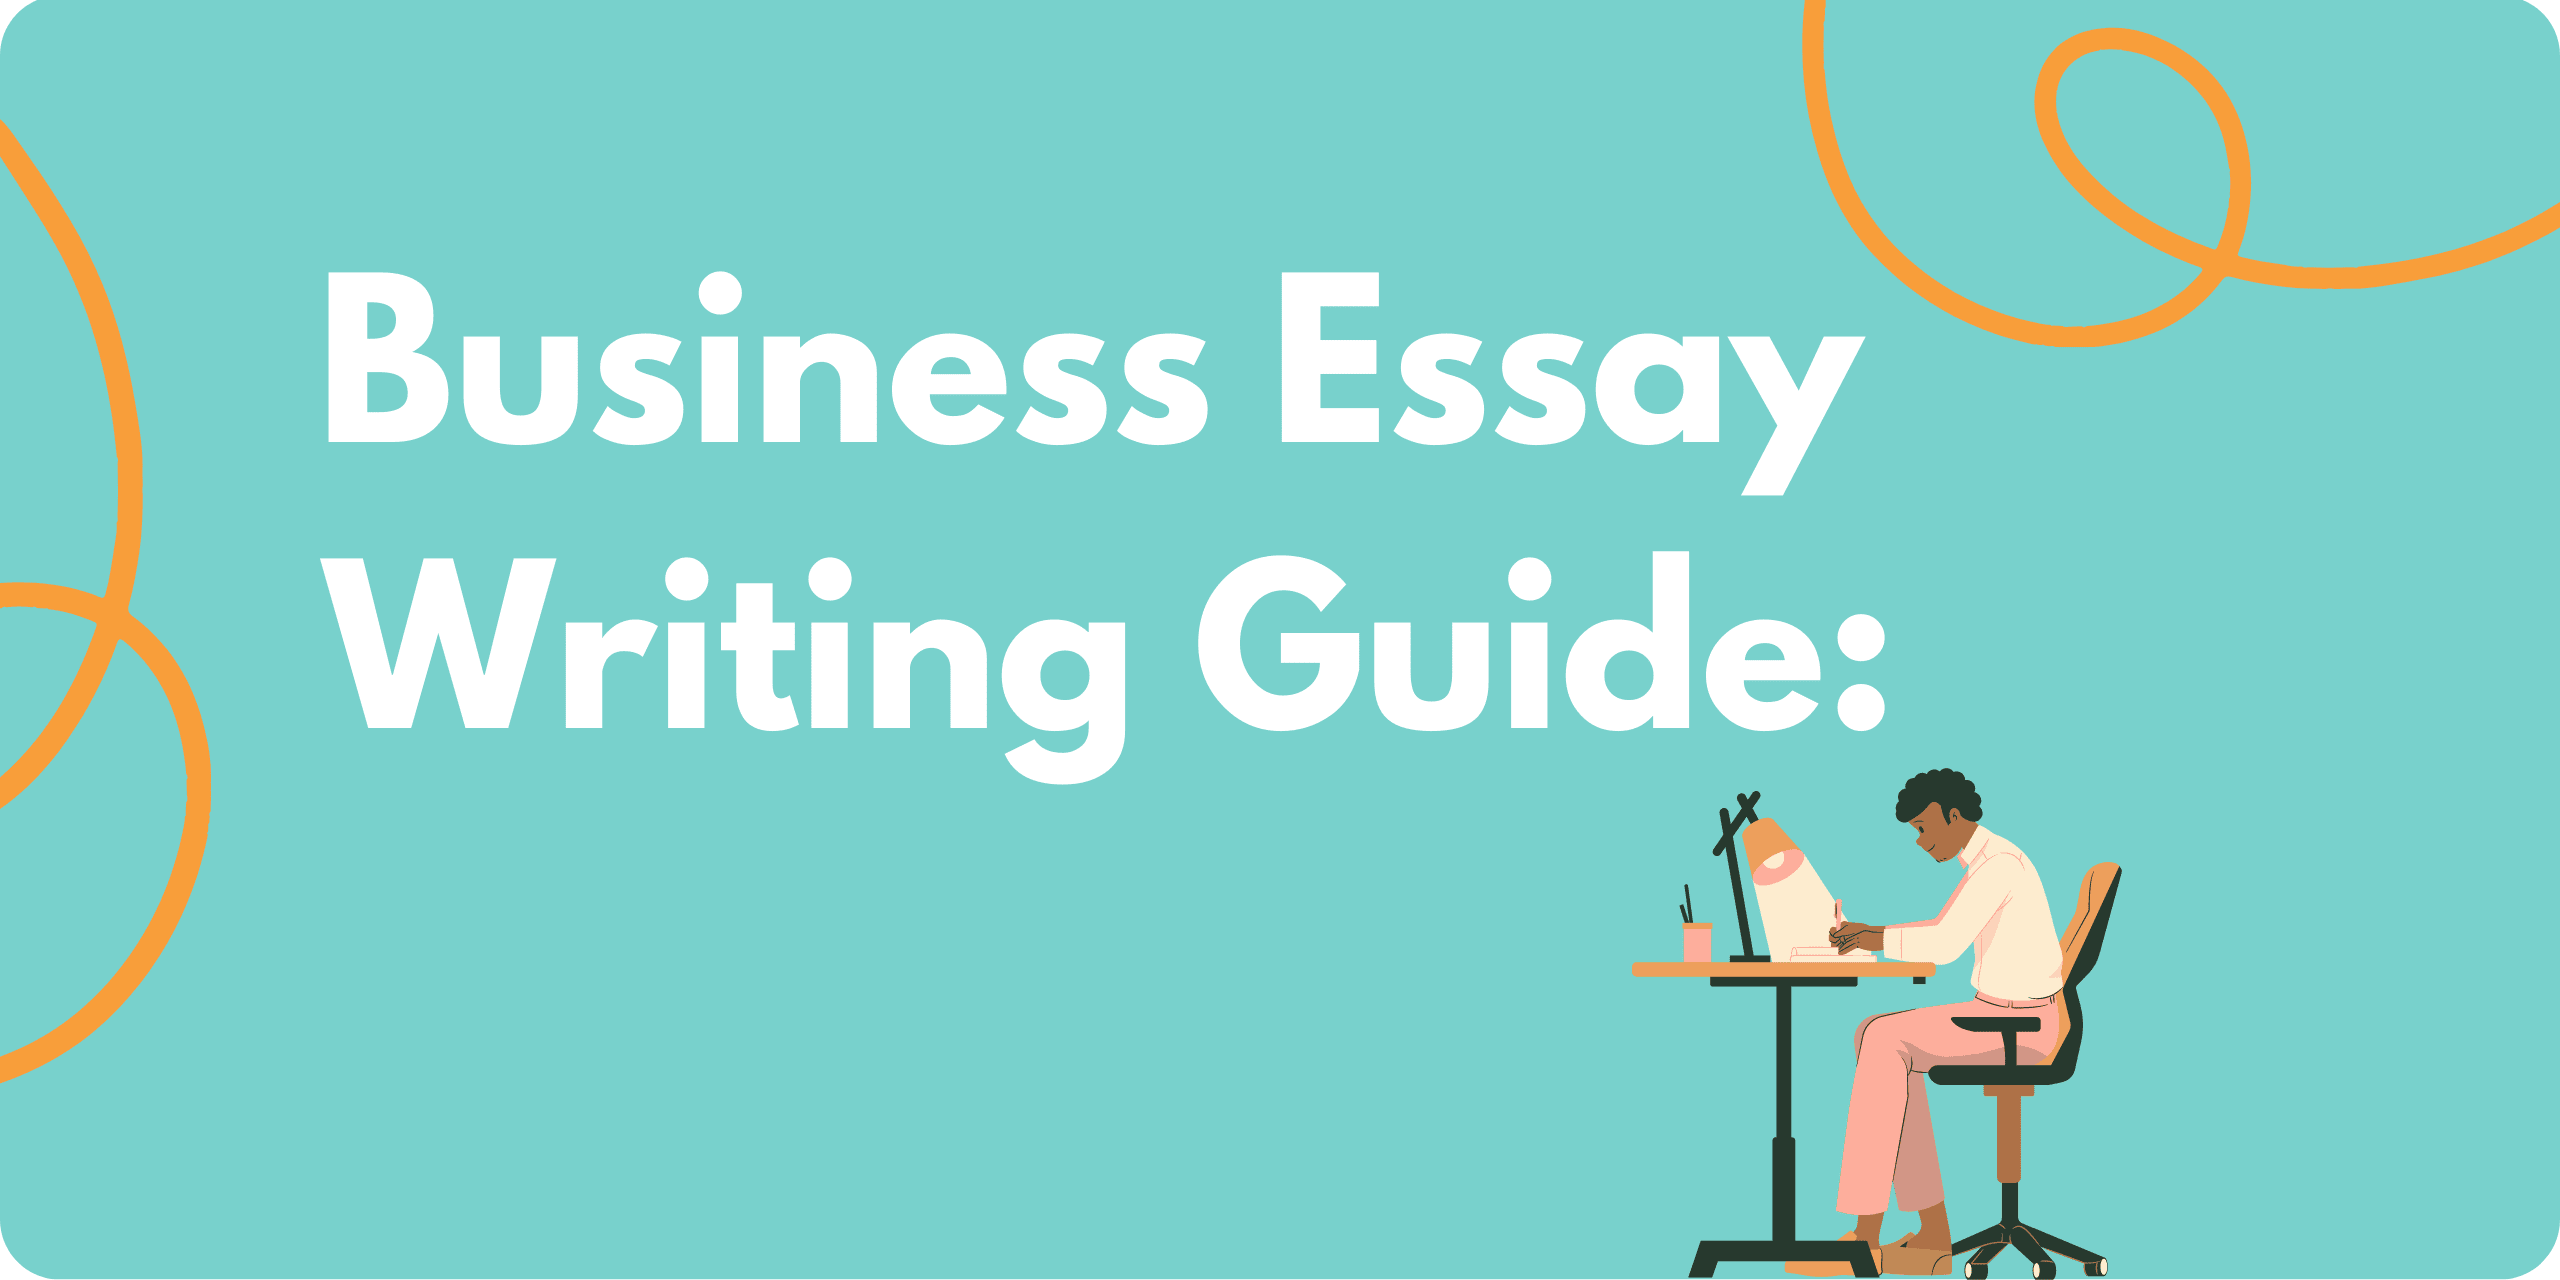 A graphic of a man sitting behind a desk, writing, with the title text: "Business Essay Writing Guide"